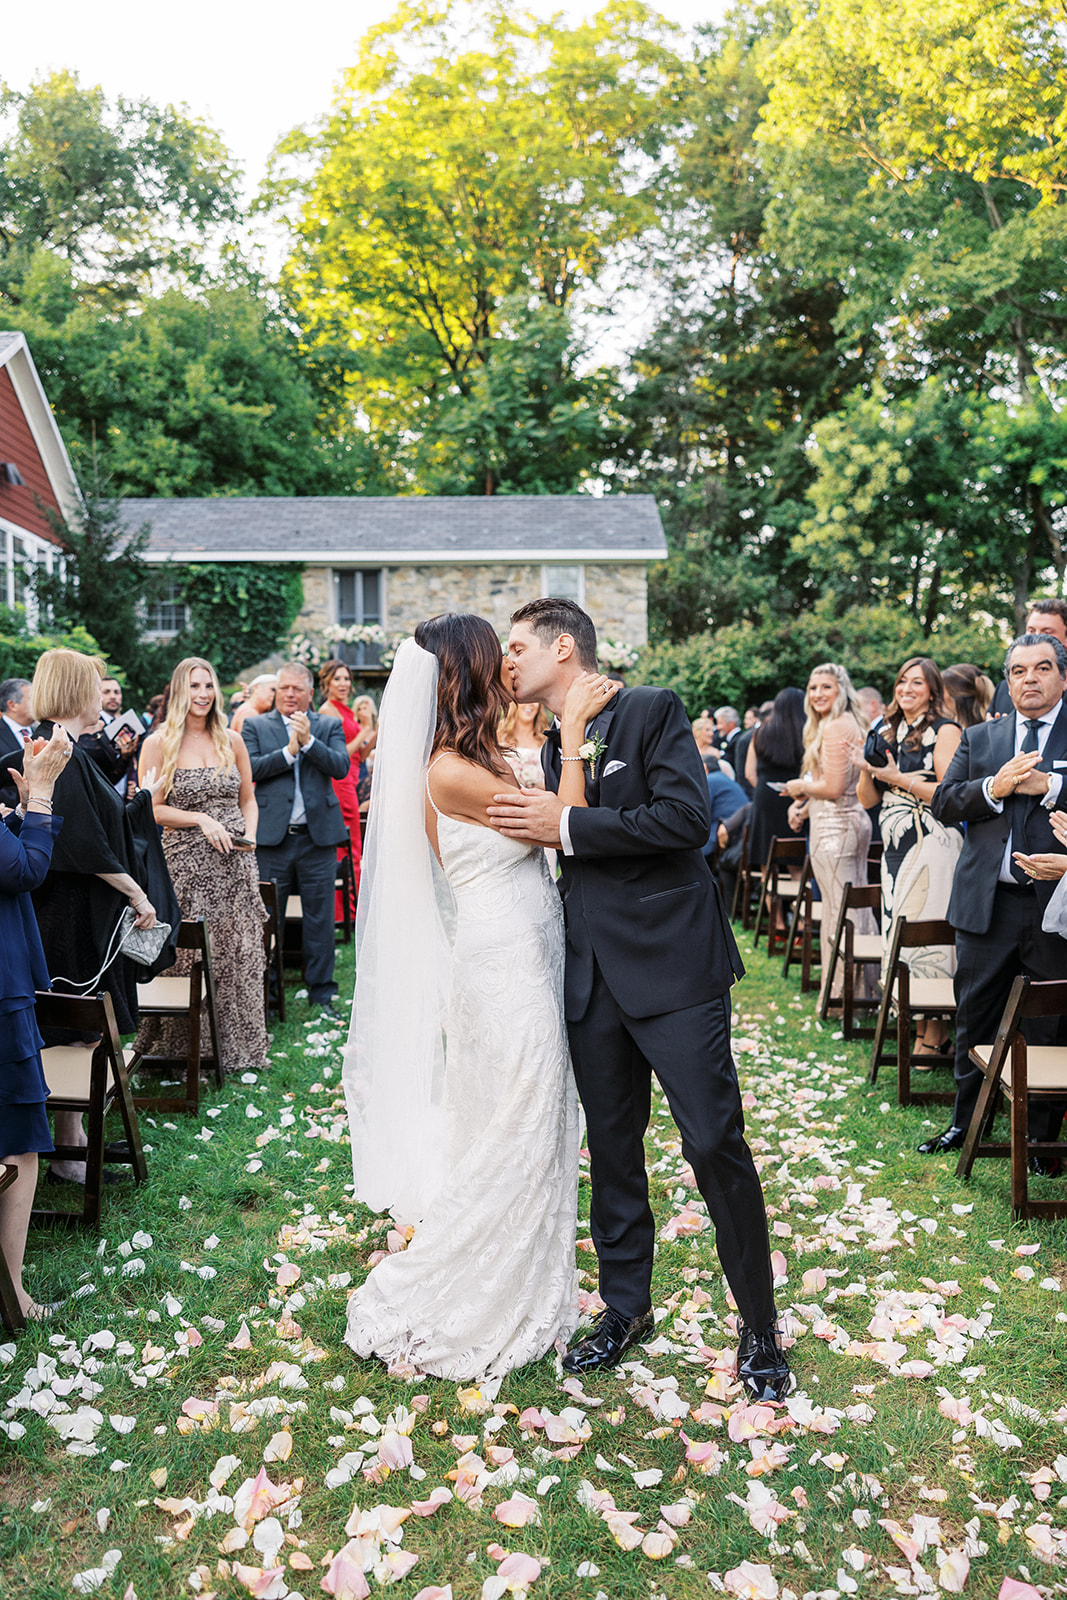 Newlyweds kiss in the flower petal covered aisle while guests clap and cheer